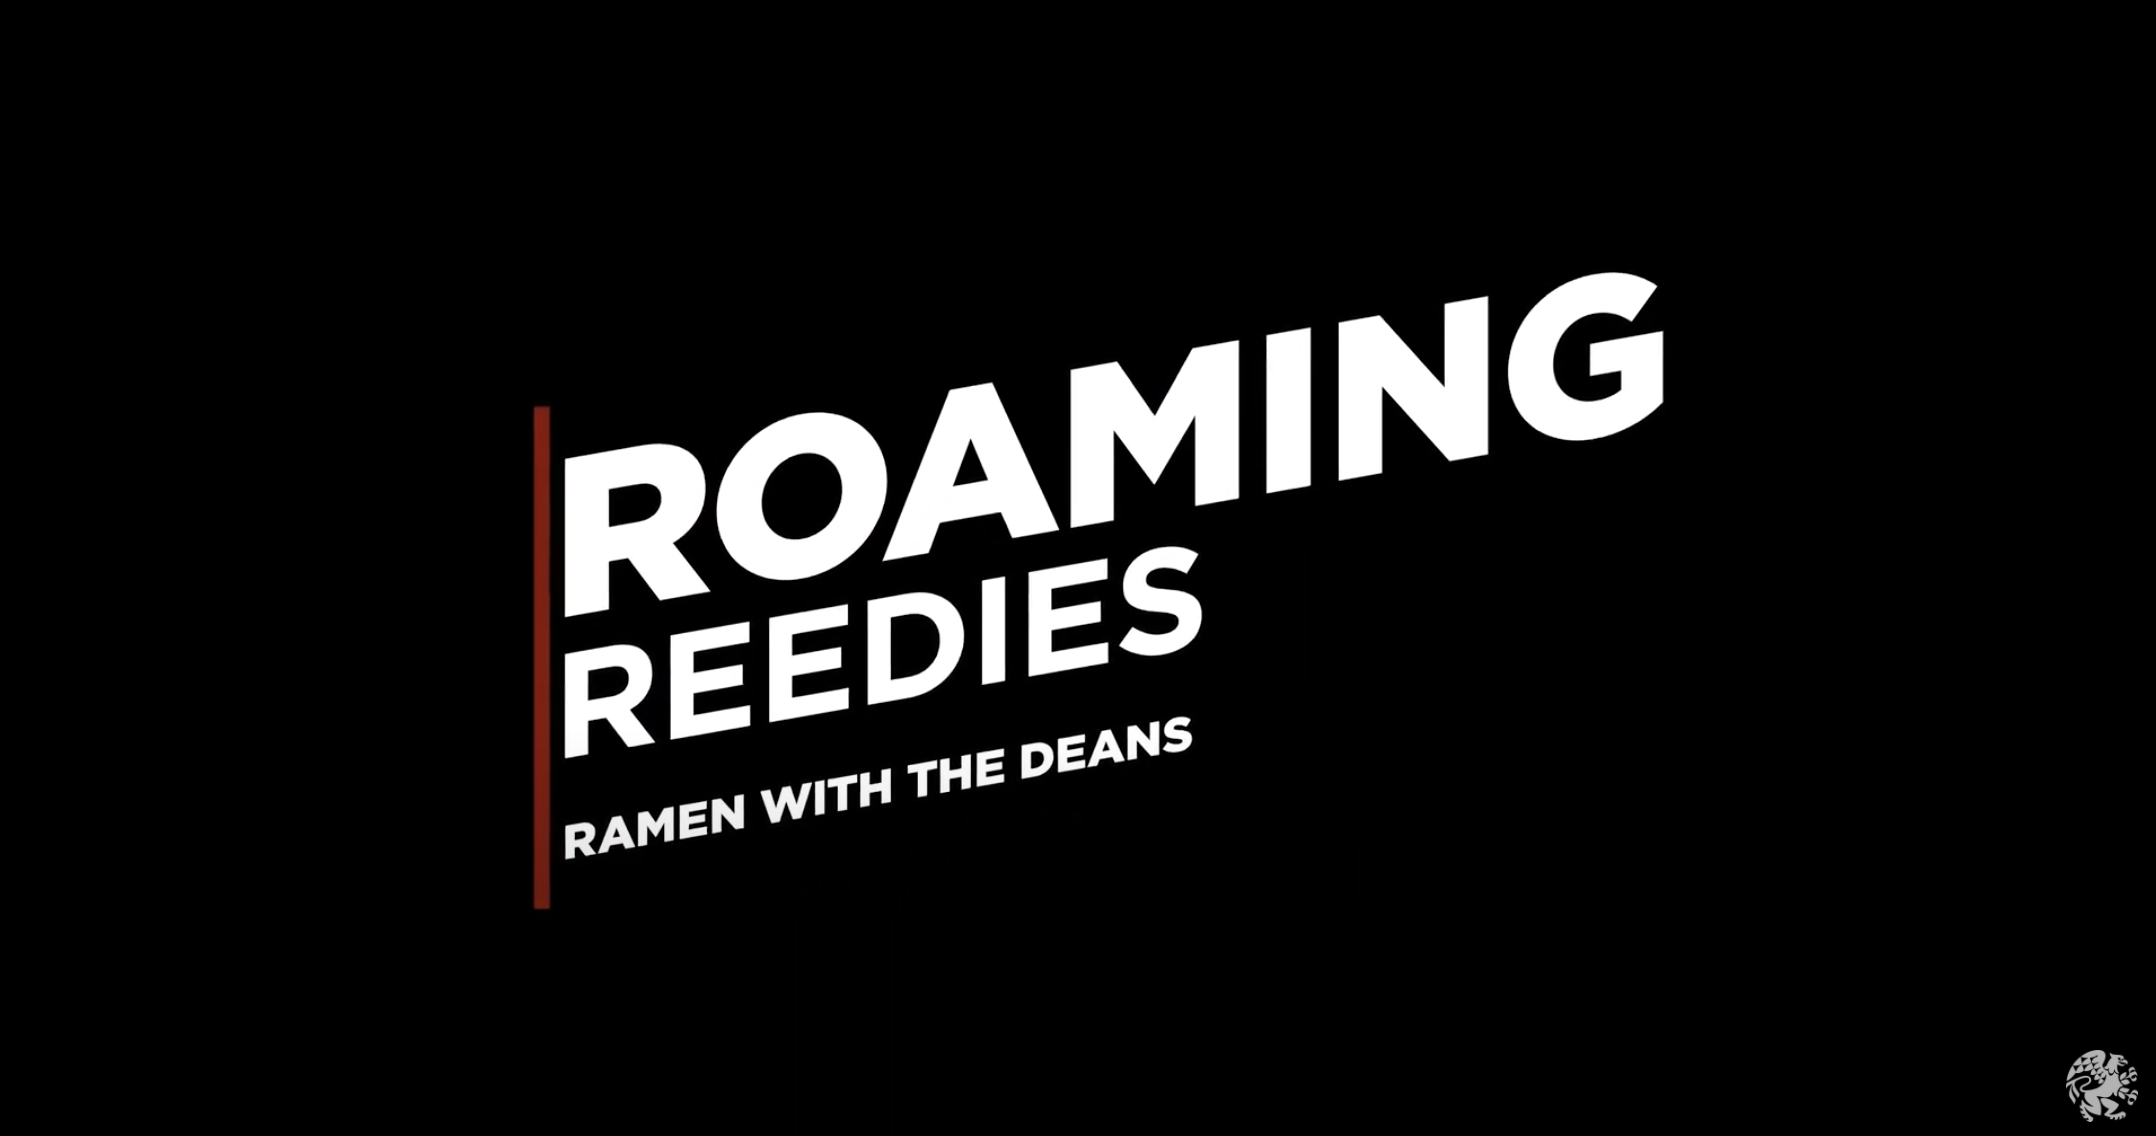 Roaming Reedies: Ramen with the Deans